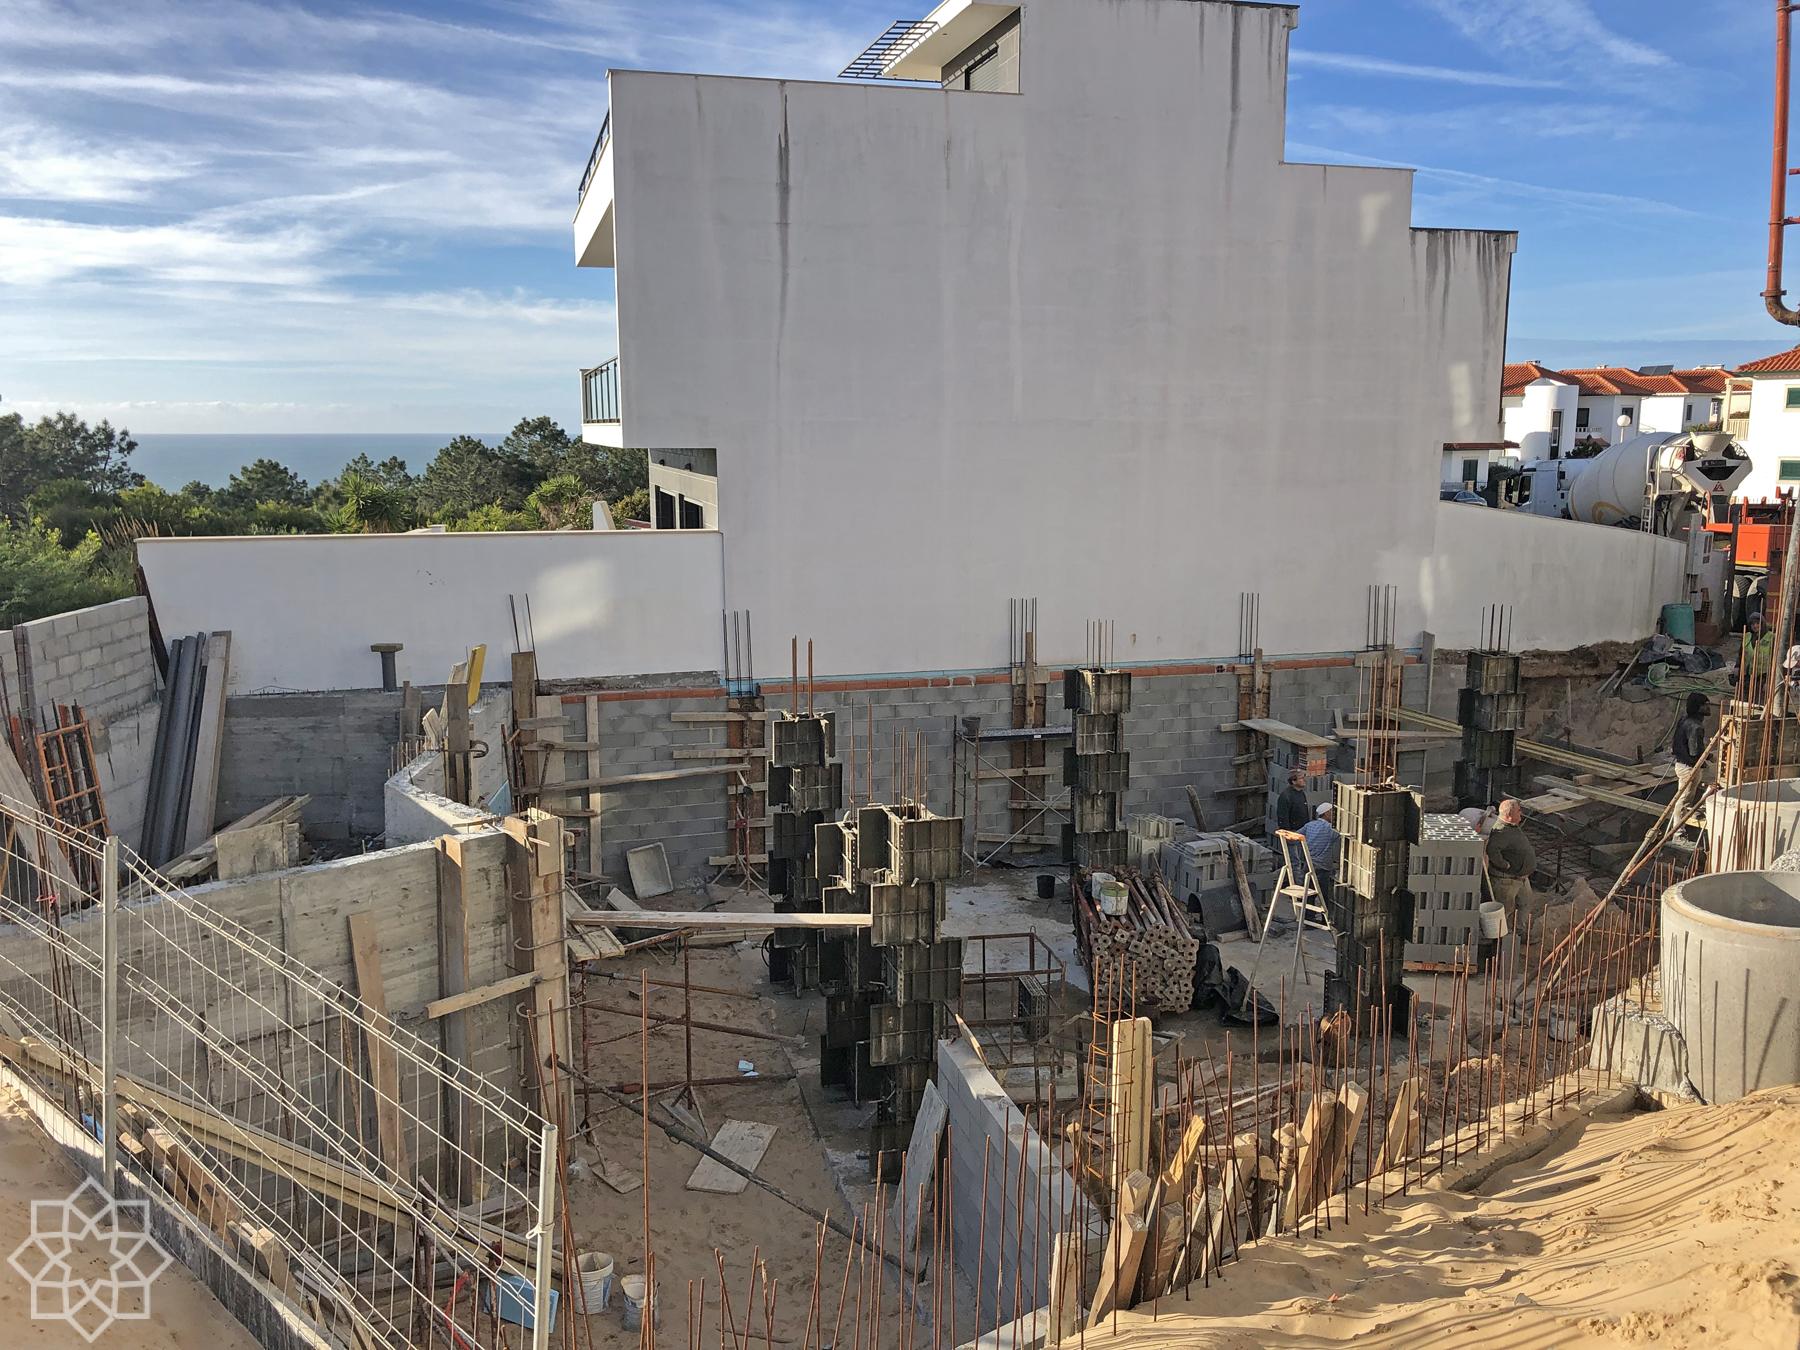 March 2019 - construction started